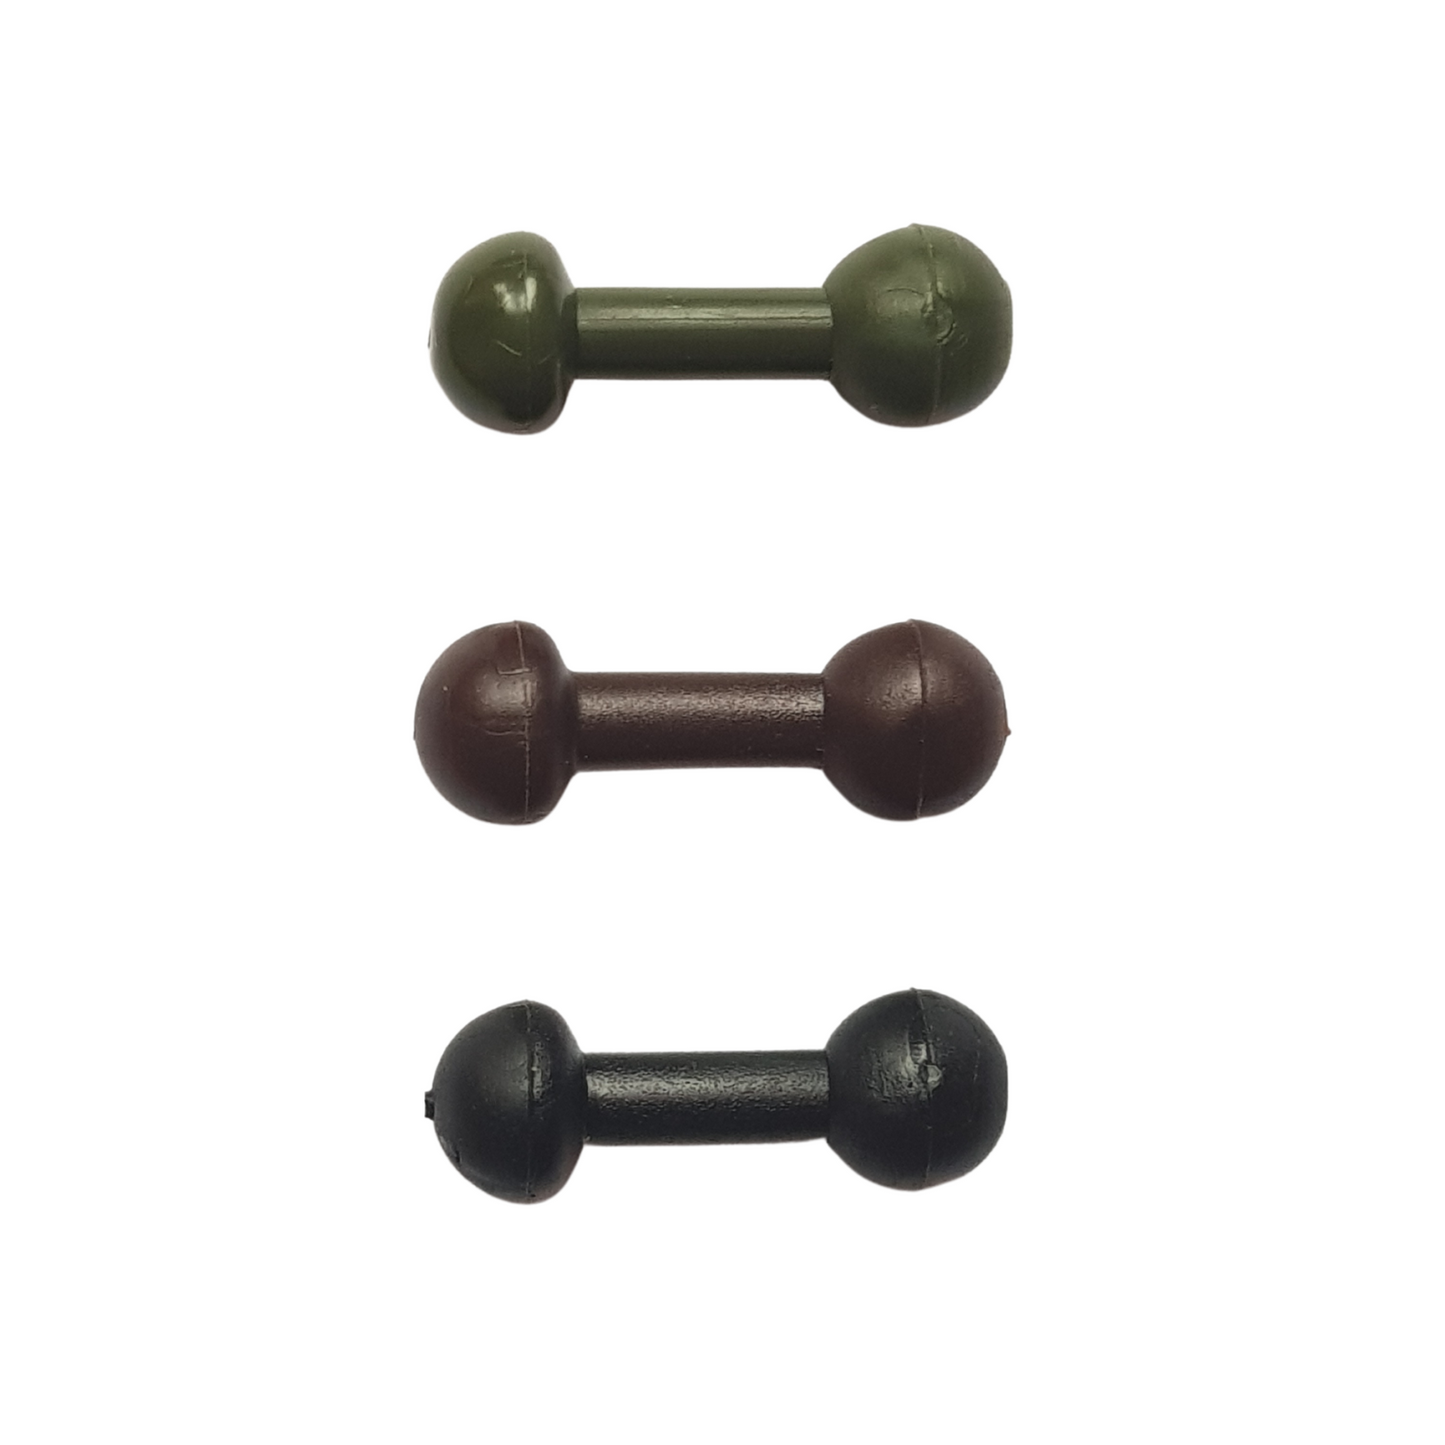 Chod Beads - Heli Rig - Chod Rig - 3 Colours - 4 Pack Sizes